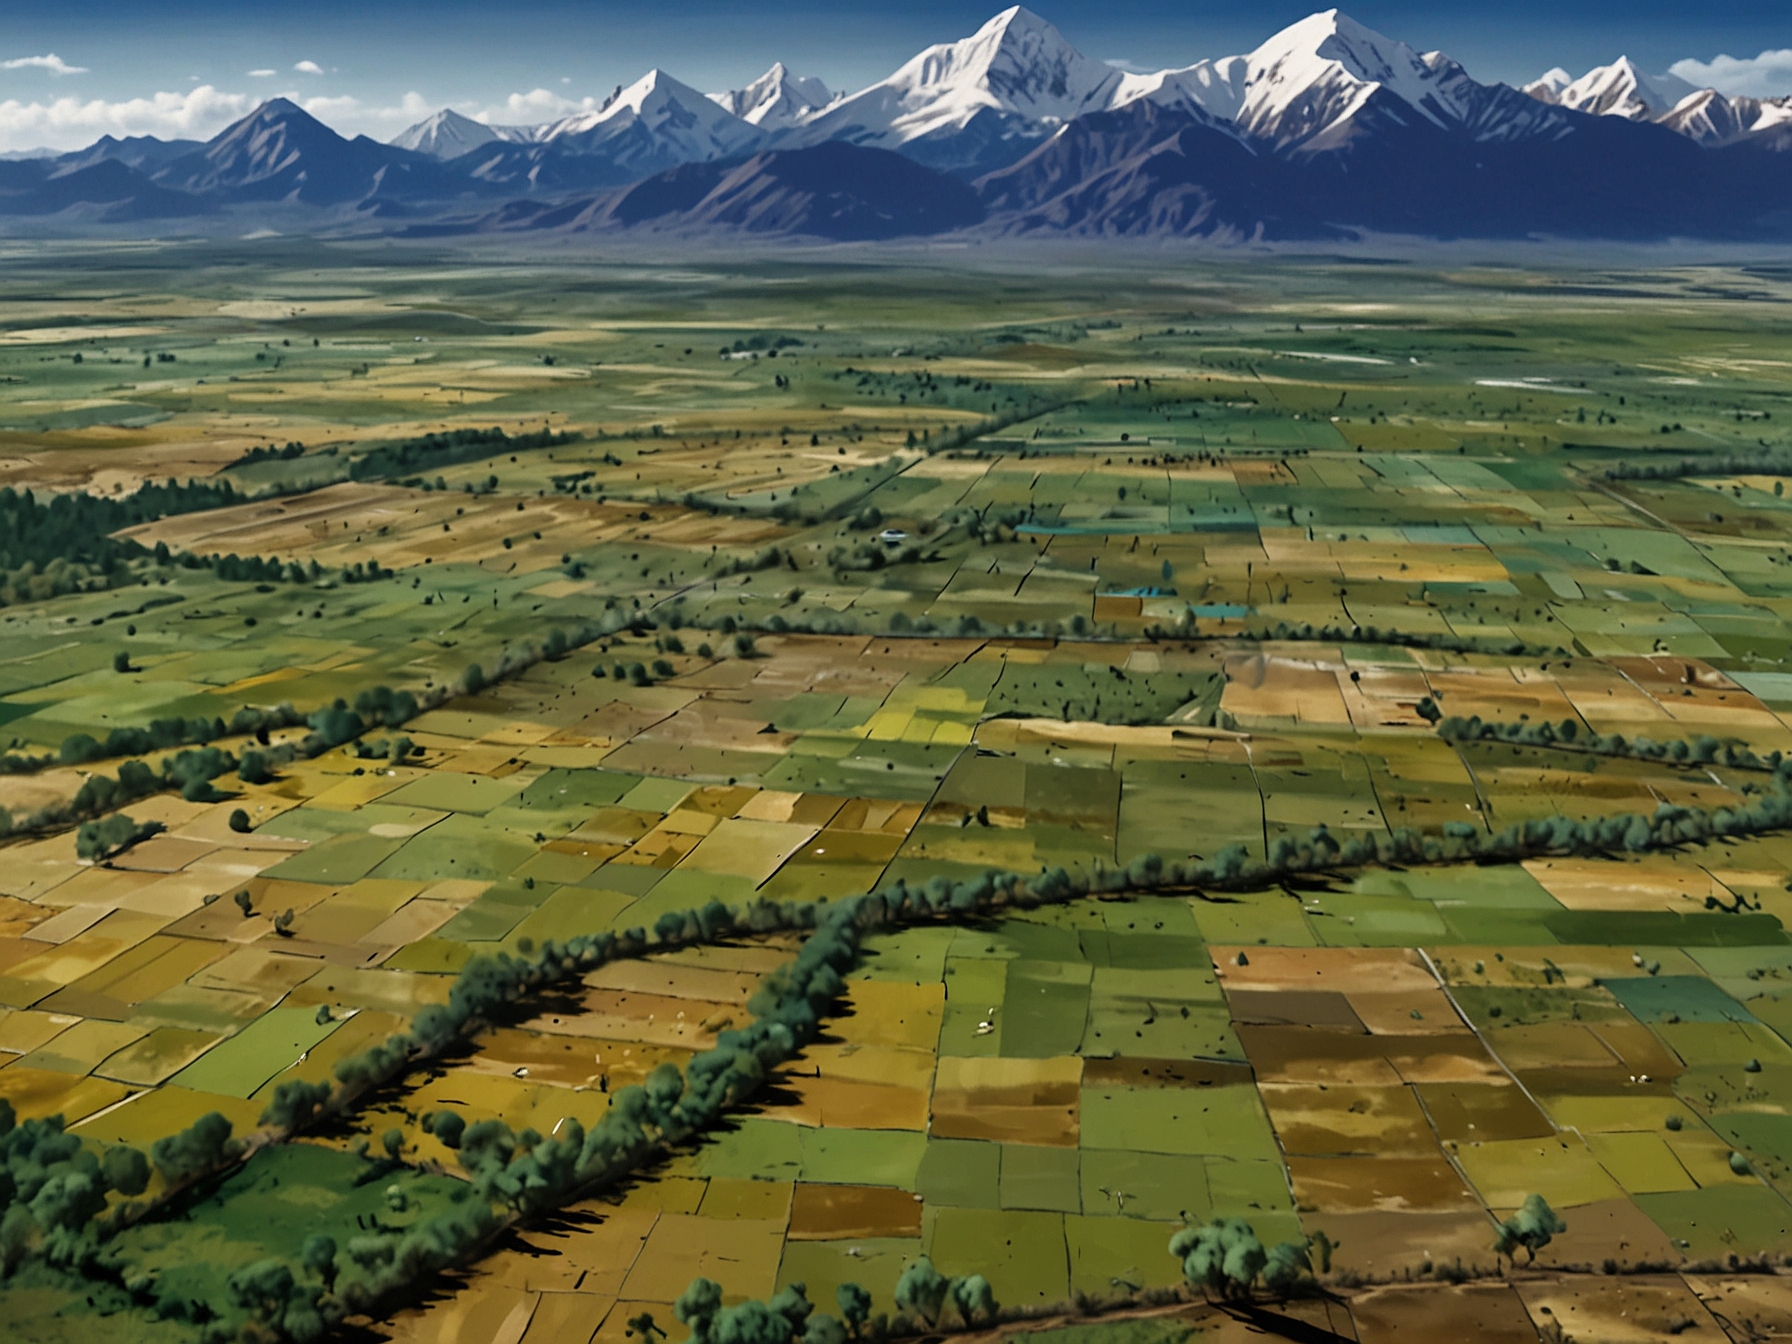 An aerial view of the Tibetan Plateau showing diverse vegetation adapted to changing climate conditions, illustrating the increase in aboveground biomass distribution over past decades.